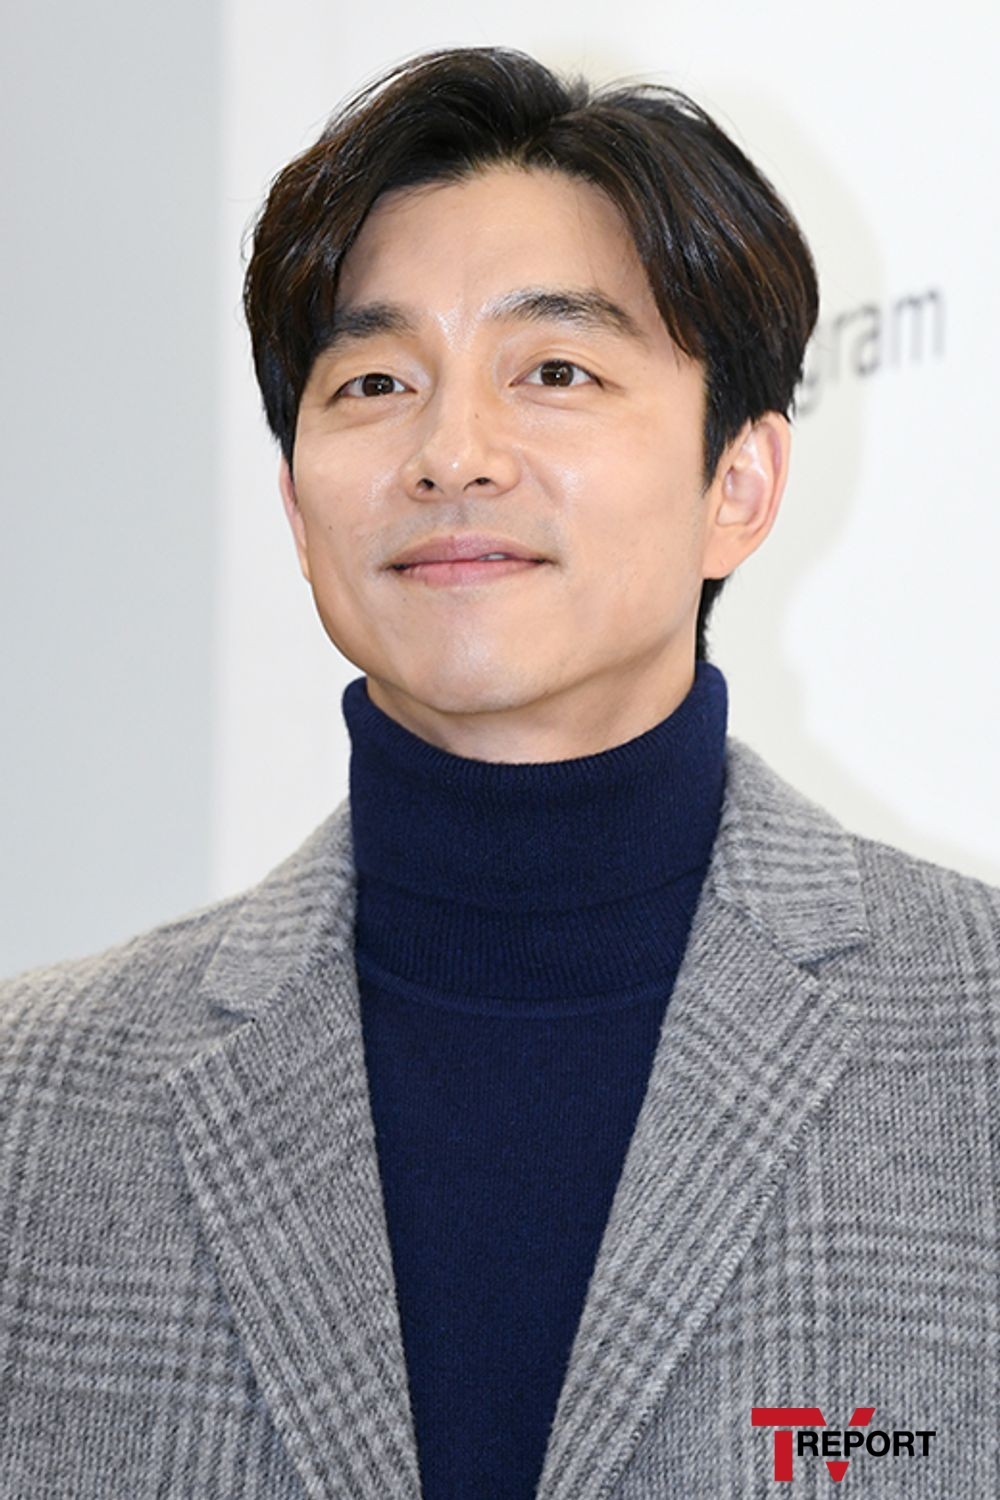 Actor Gong Yoo is reviewing his appearance in the Netflix original series The Sea of ​​Silence produced by Jung Woo-sung.On the 21st, the management forest of the agency said, Gong Yoo is reviewing the appearance of Silence Sea.Silence Sea is a series based on a short film of the same name. It is the story of elite members who go to the research base abandoned on the moon to recover a sample of questions in the background of the future earth where water and food are scarce due to global desertification.Gong Yoo was offered the role of Yoon Jae, a soldier and team leader of the Korea Aerospace Administration, and Bae Doo-na, Lee Jun-hyuk and Kim Sun-young were among the top candidates.The Sea of ​​Silence is written by Park Eun-kyo, who wrote Megaphone and Mother by Choi Hang-yong, who participated as a producer and directed the original work.It will be produced in eight episodes and will be filmed in August.